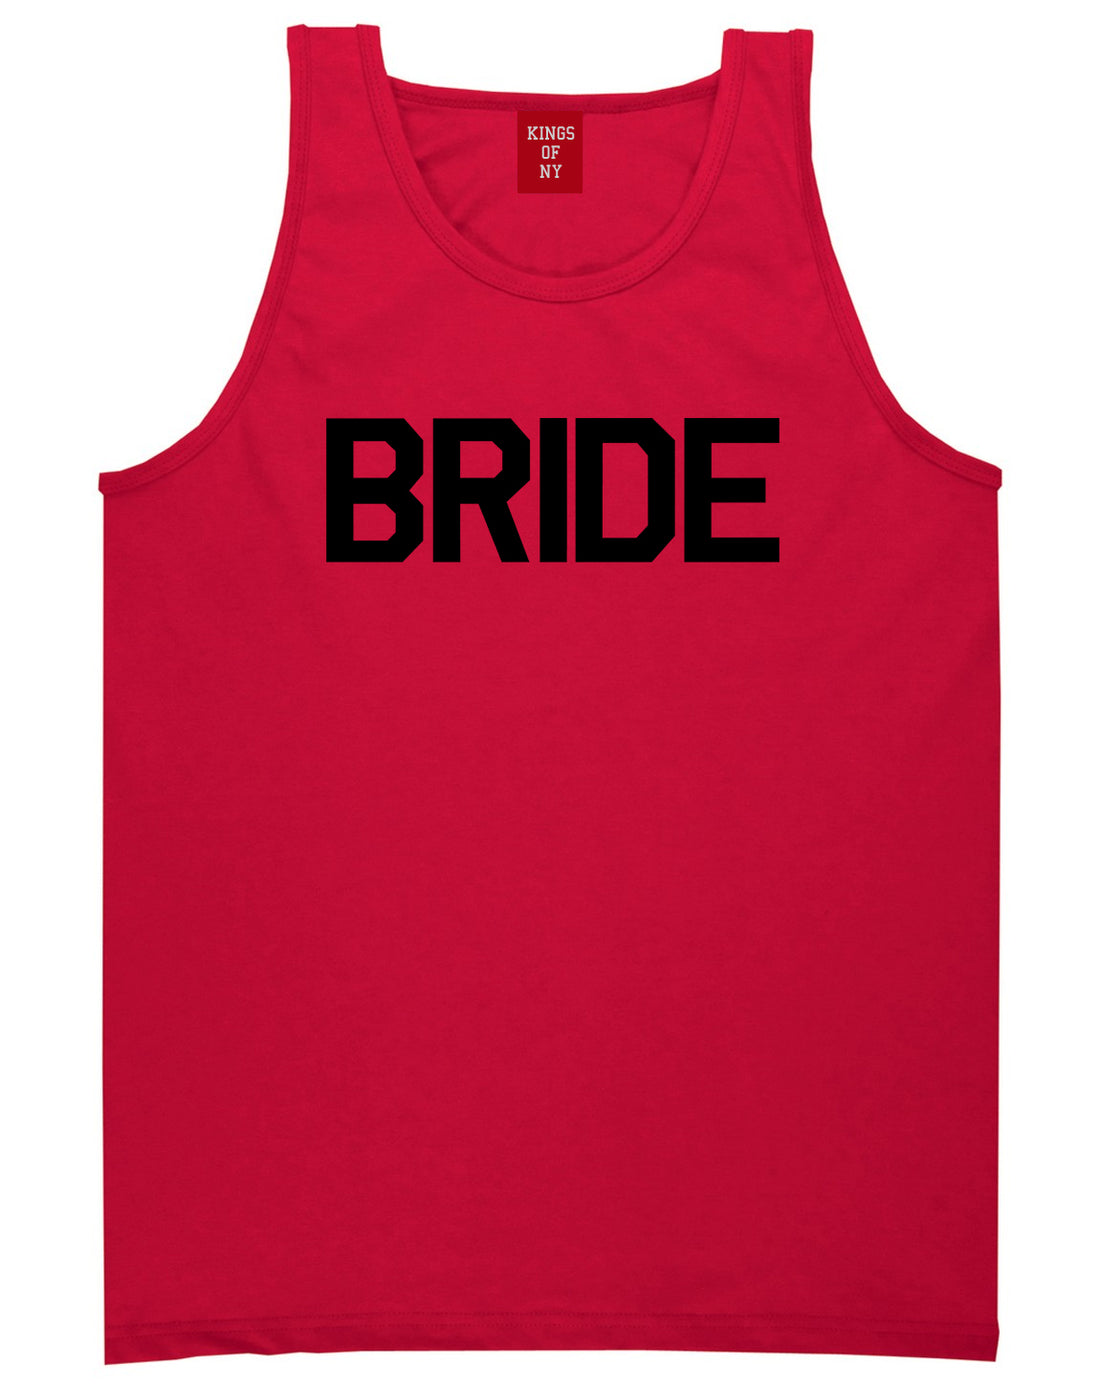 Bride Bachlorette Party Red Tank Top Shirt by Kings Of NY